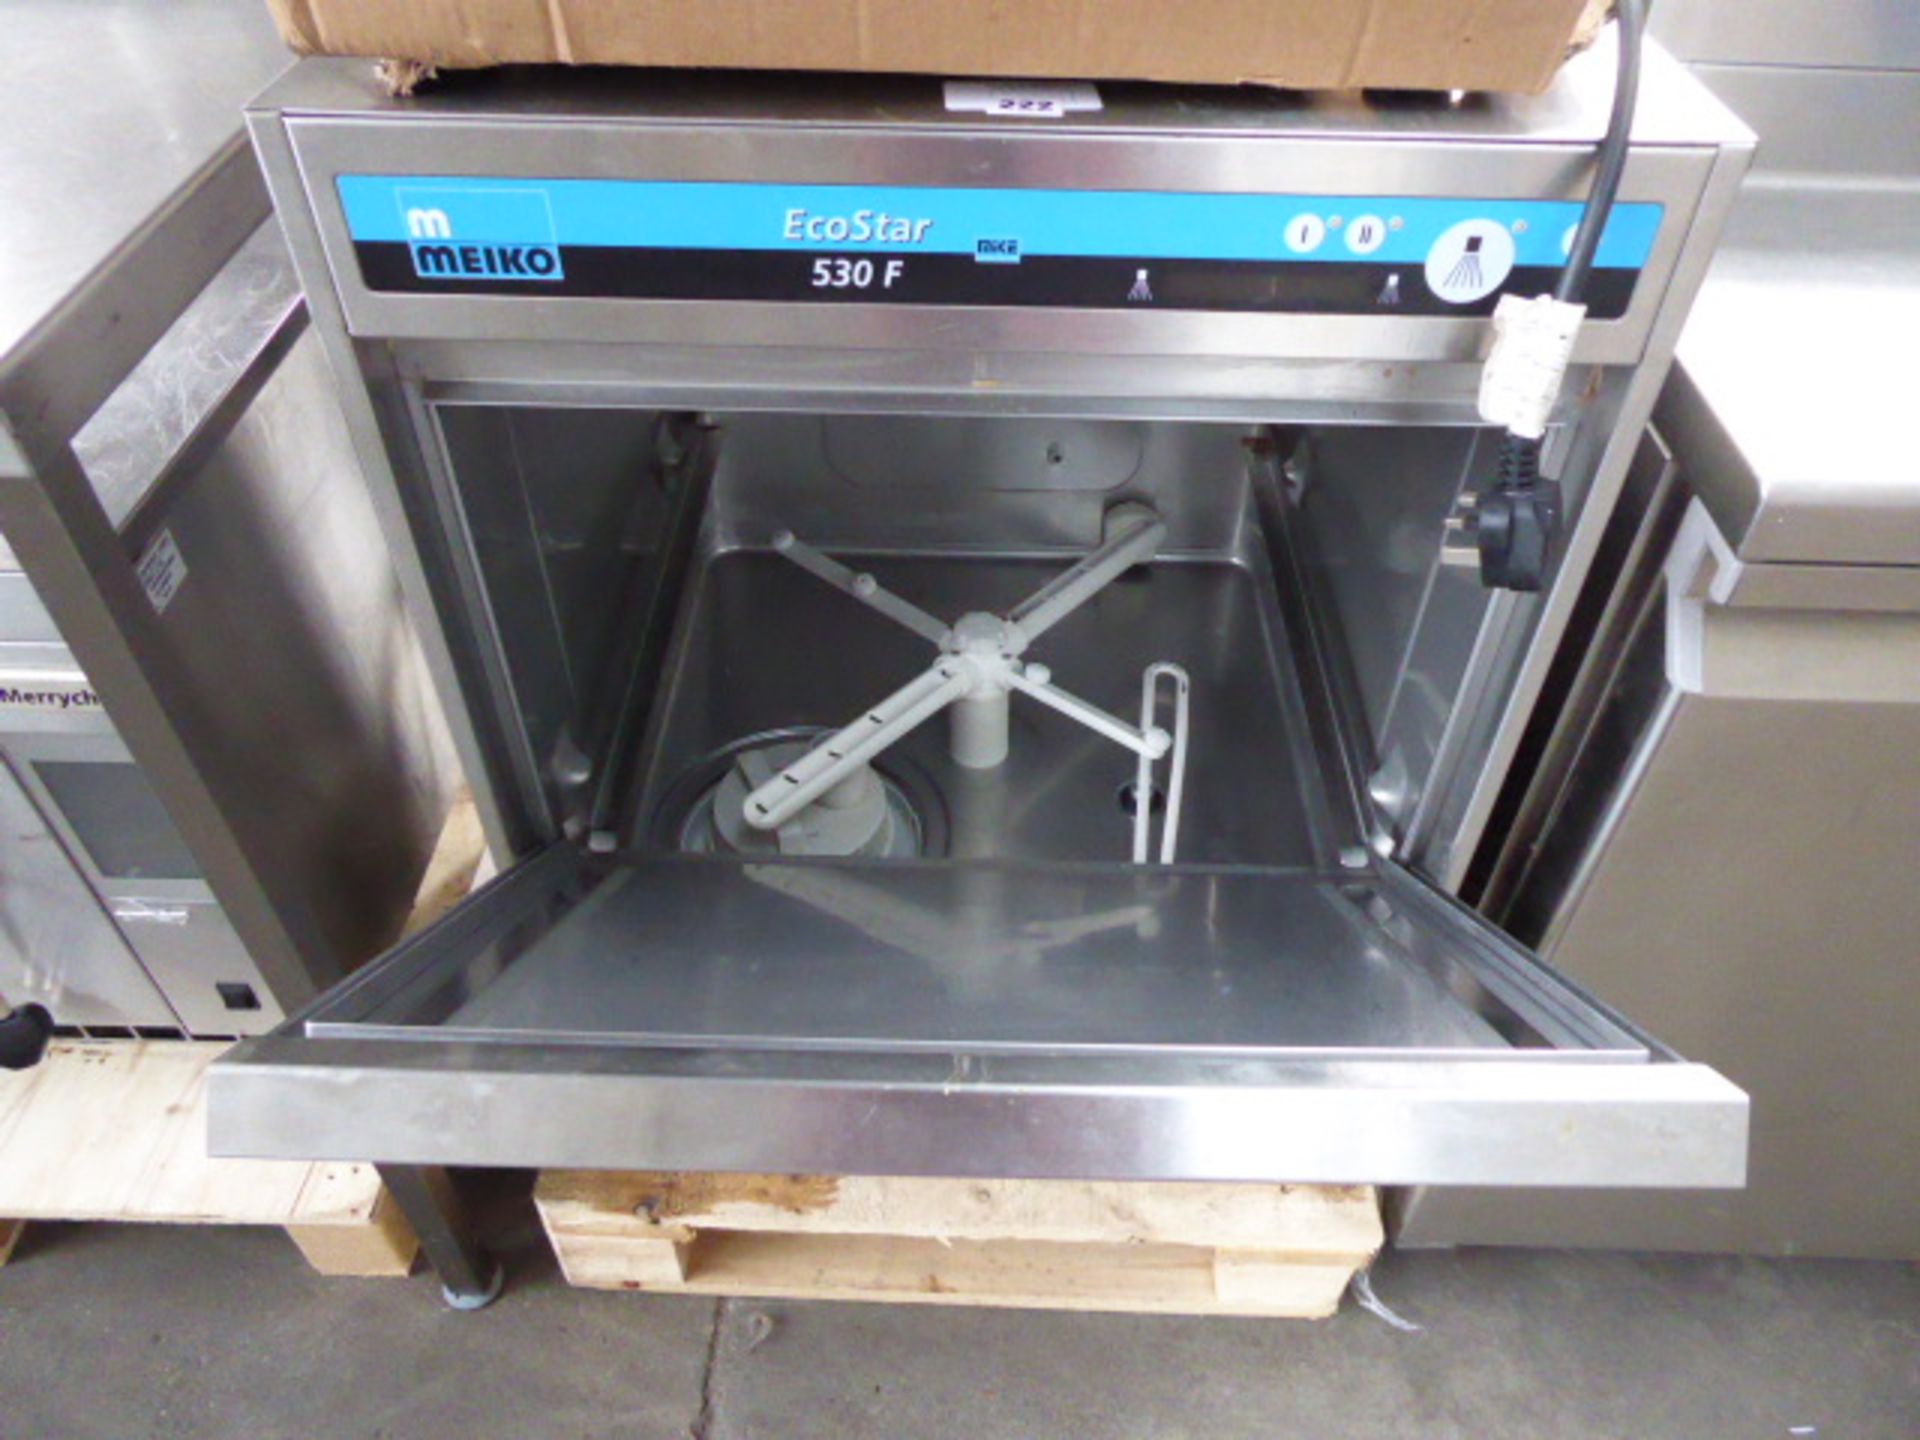 60cm Meiko Eco Star 530F under counter drop front dish washer - Image 2 of 2